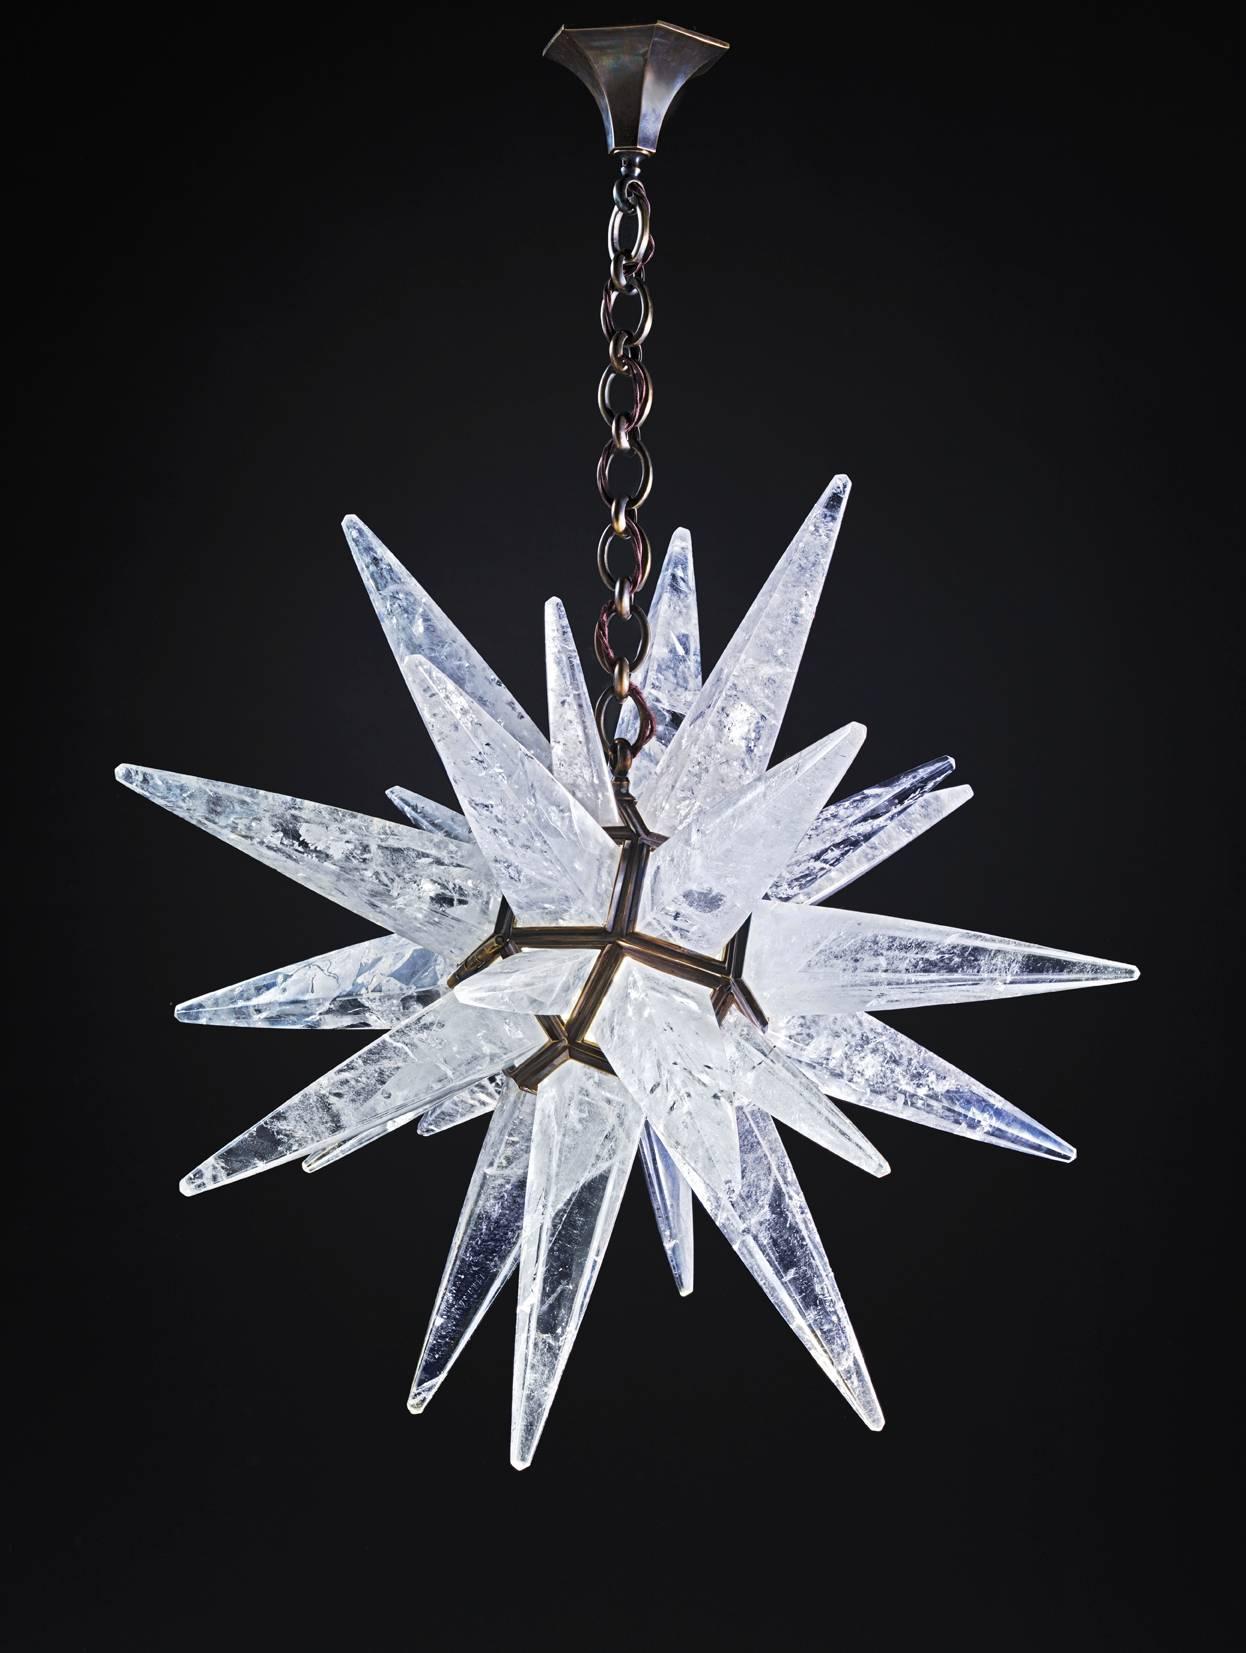 Rock crystal quartz star I light antique brass edition.
This patina is made by qualified worker with acids which are burn to a fire, so this color come into the bronze of the fixture for ever and make a patina like a bronze sculpture. Since 2011